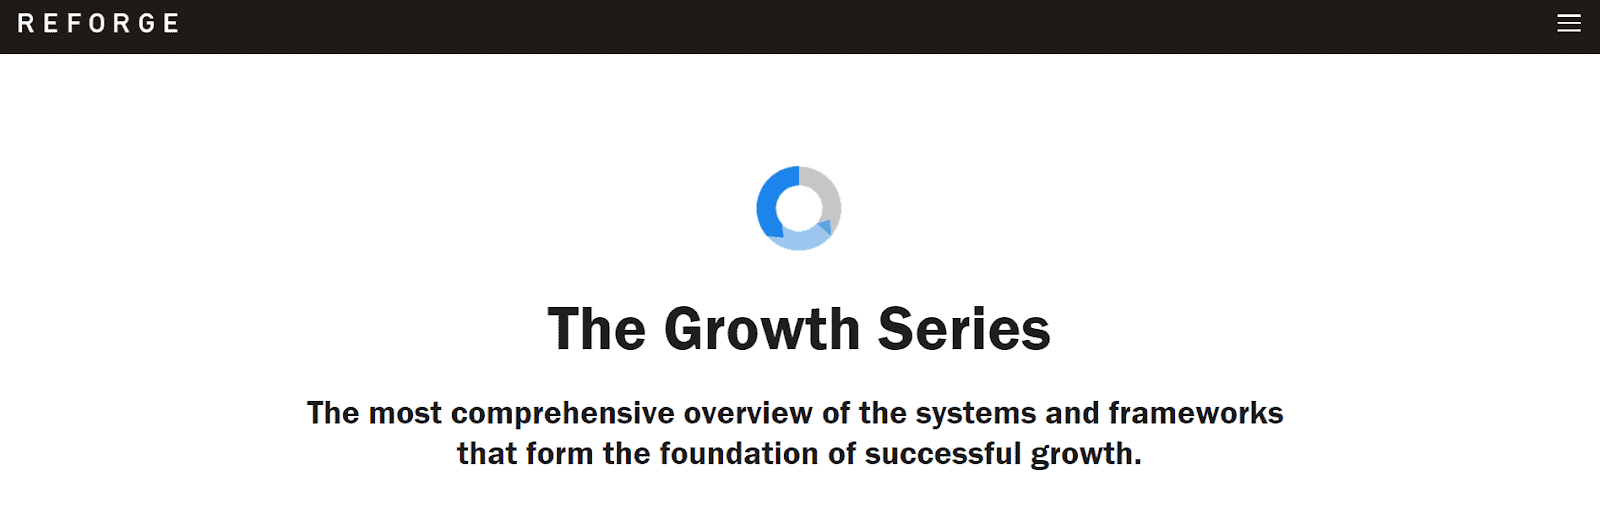 Growth Marketing Courses & Certification - The Growth Series